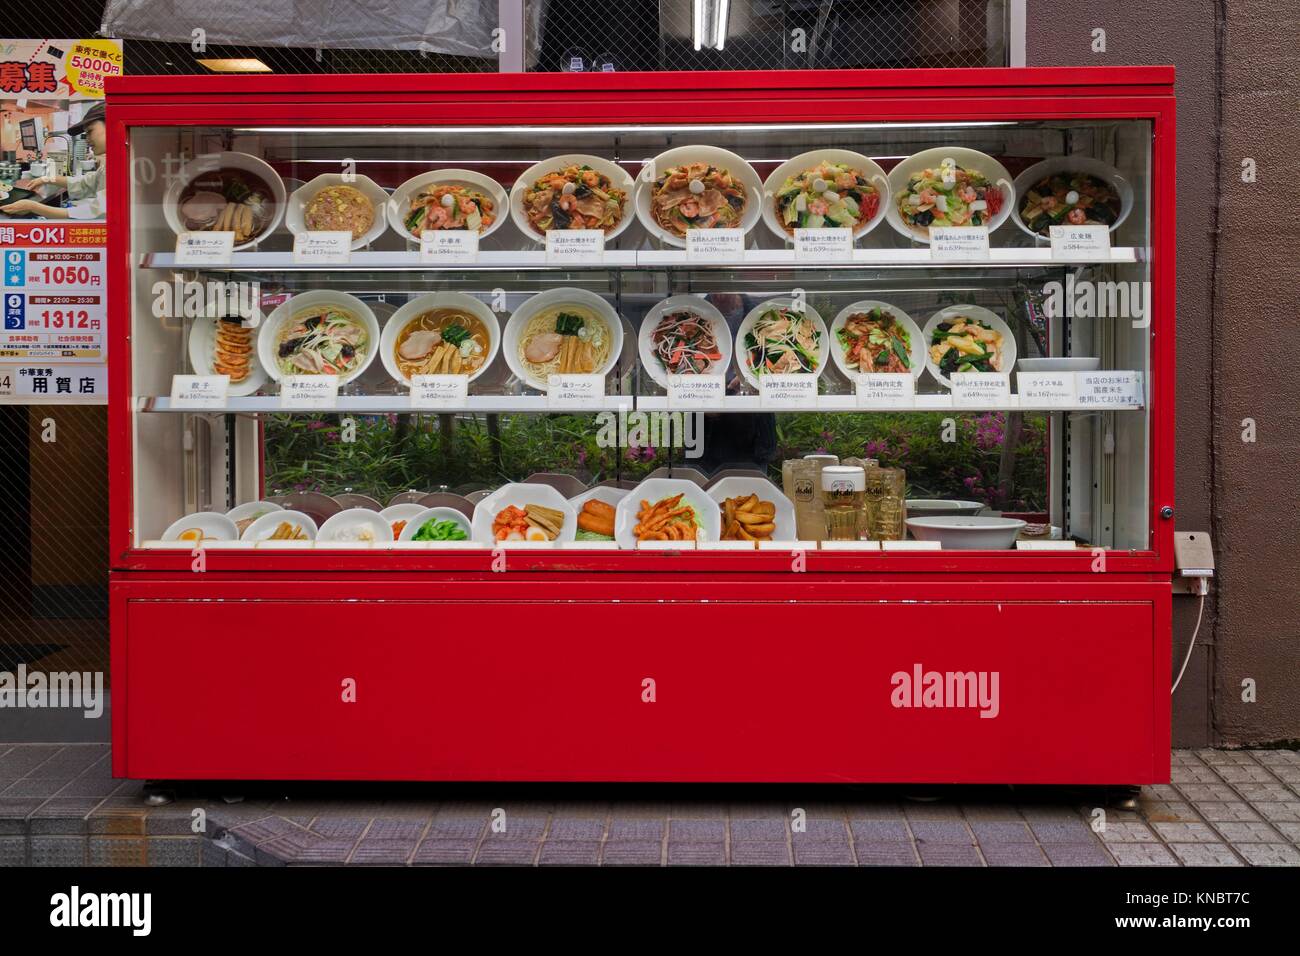 Tokyo, Japan - May 11, 2017: Display of replica food outdoors in front of a restaurant. Stock Photo